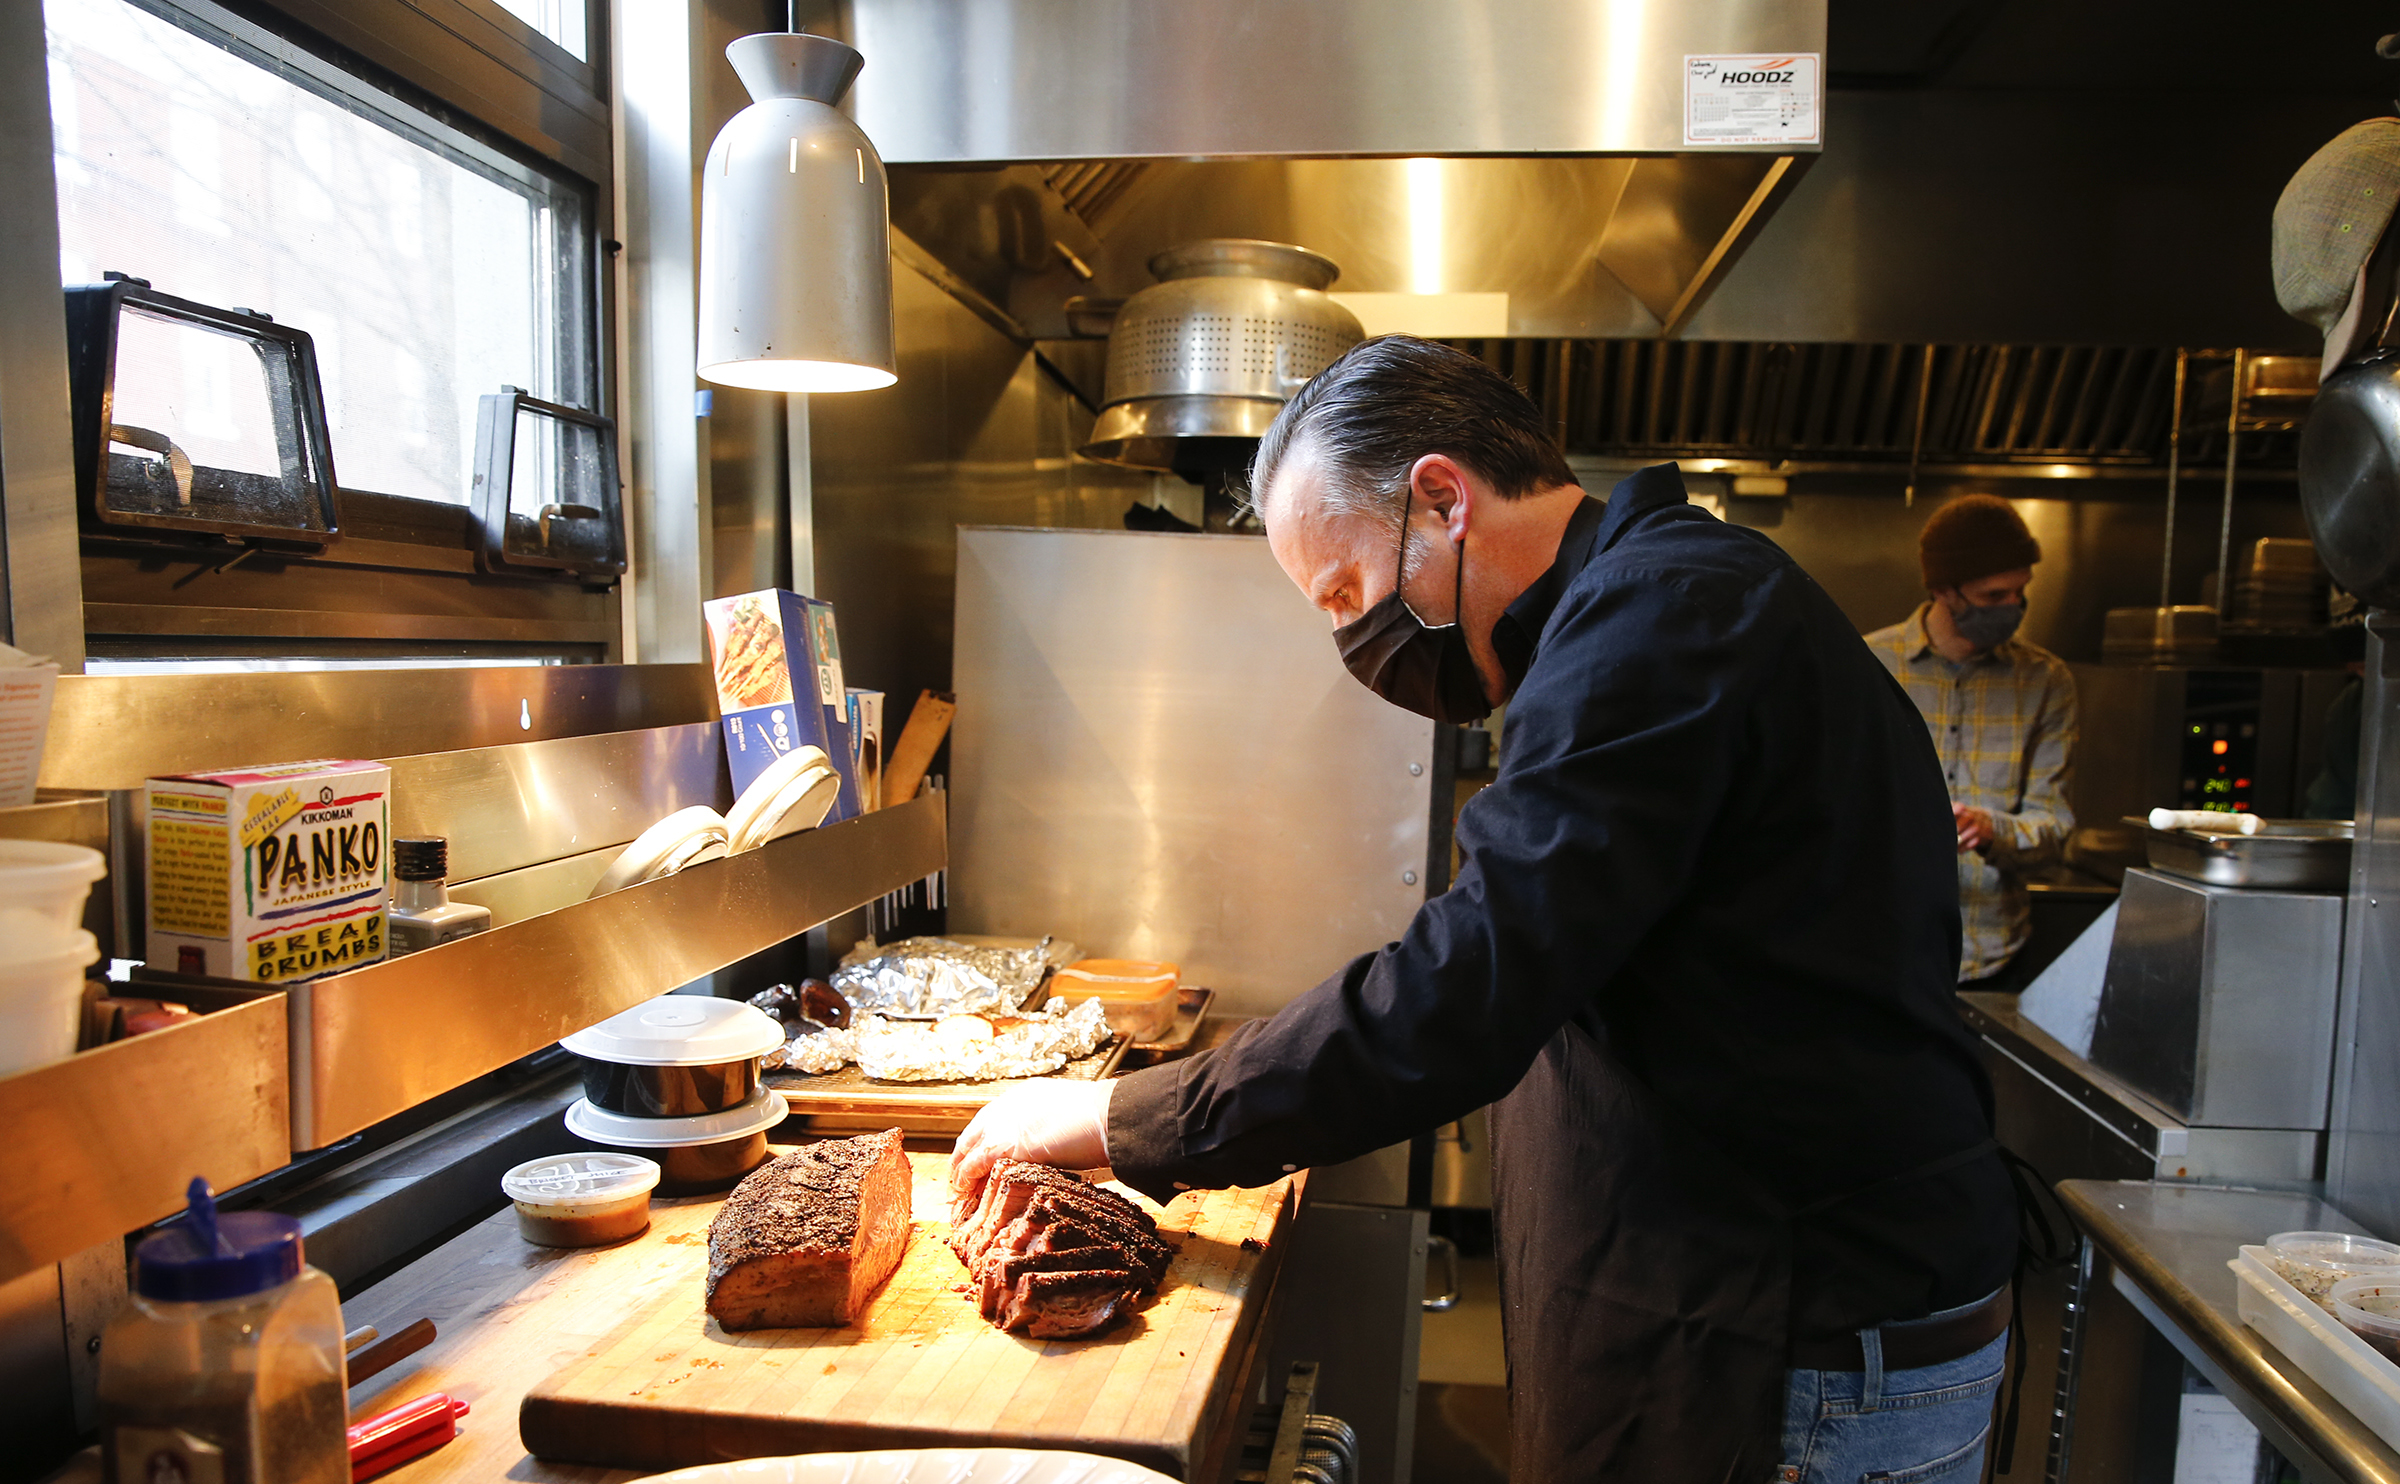 Scott Hanson slices a Central Texas Style Smoked Brisket at Cadence Restaurant in the Fishtown section of Philadelphia on Monday, March 15, 2021. Hanson, a Texas barbecue pitmaster is opening pop-up with a Tex-Mex twist at Cadence in Fishtown.